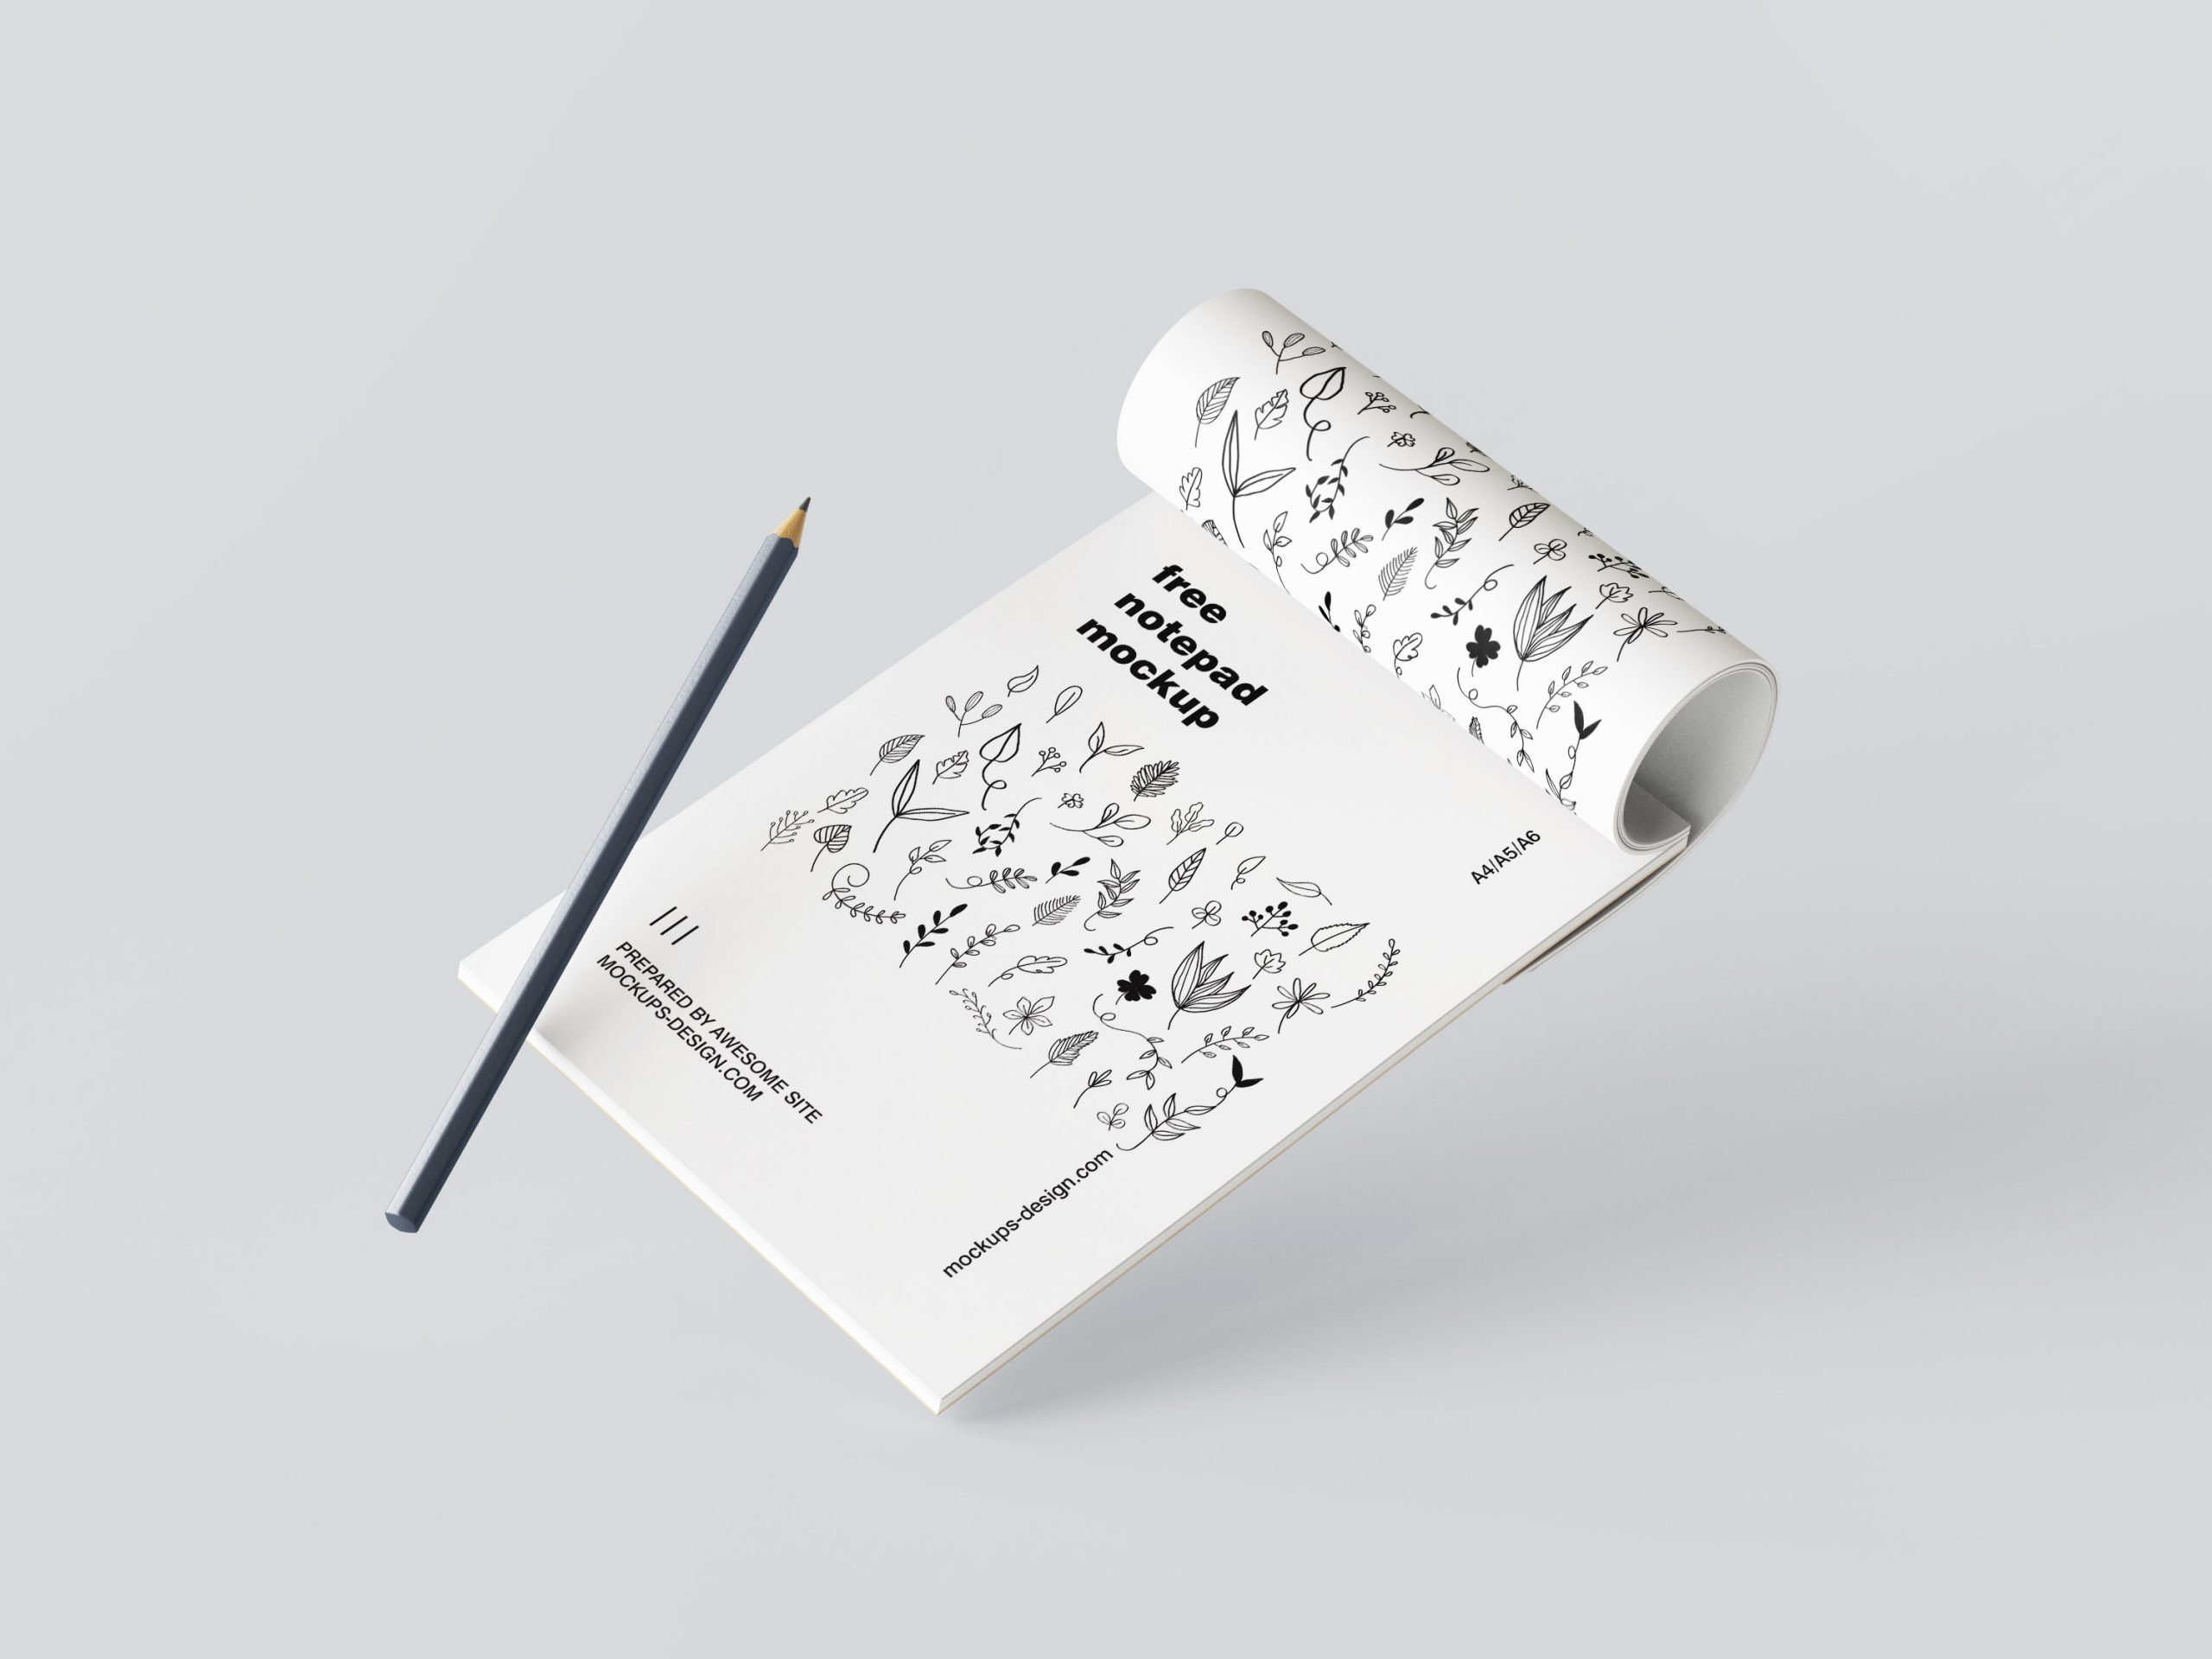 5 Mockups of Notepad with Pencil in Various Perspective Views FREE PSD